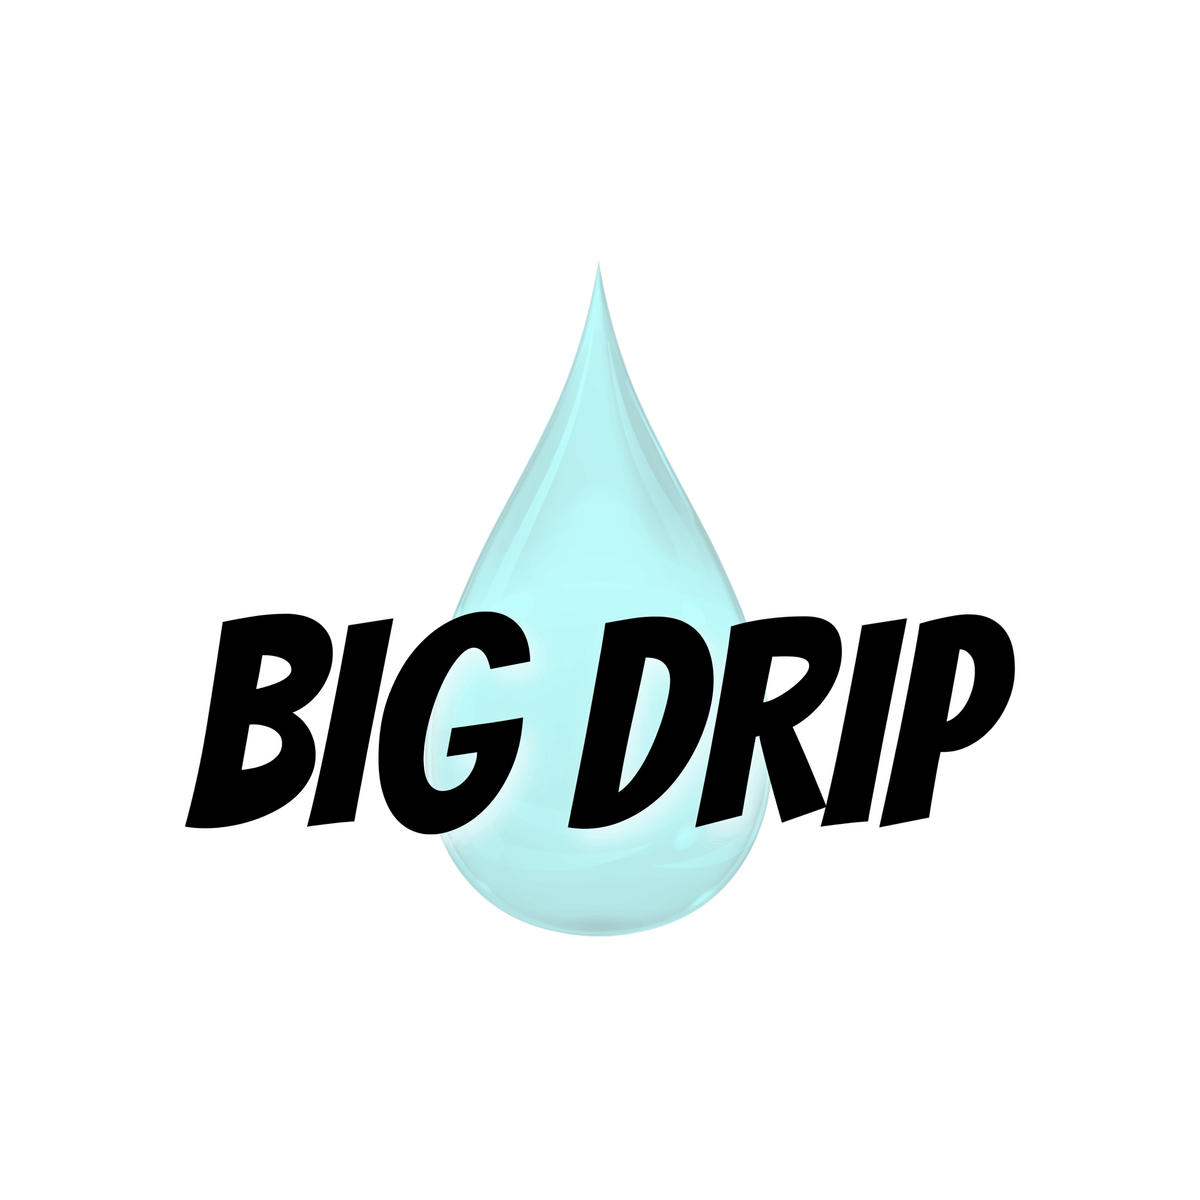 Big Drip 16 Pool Party The Final Drip